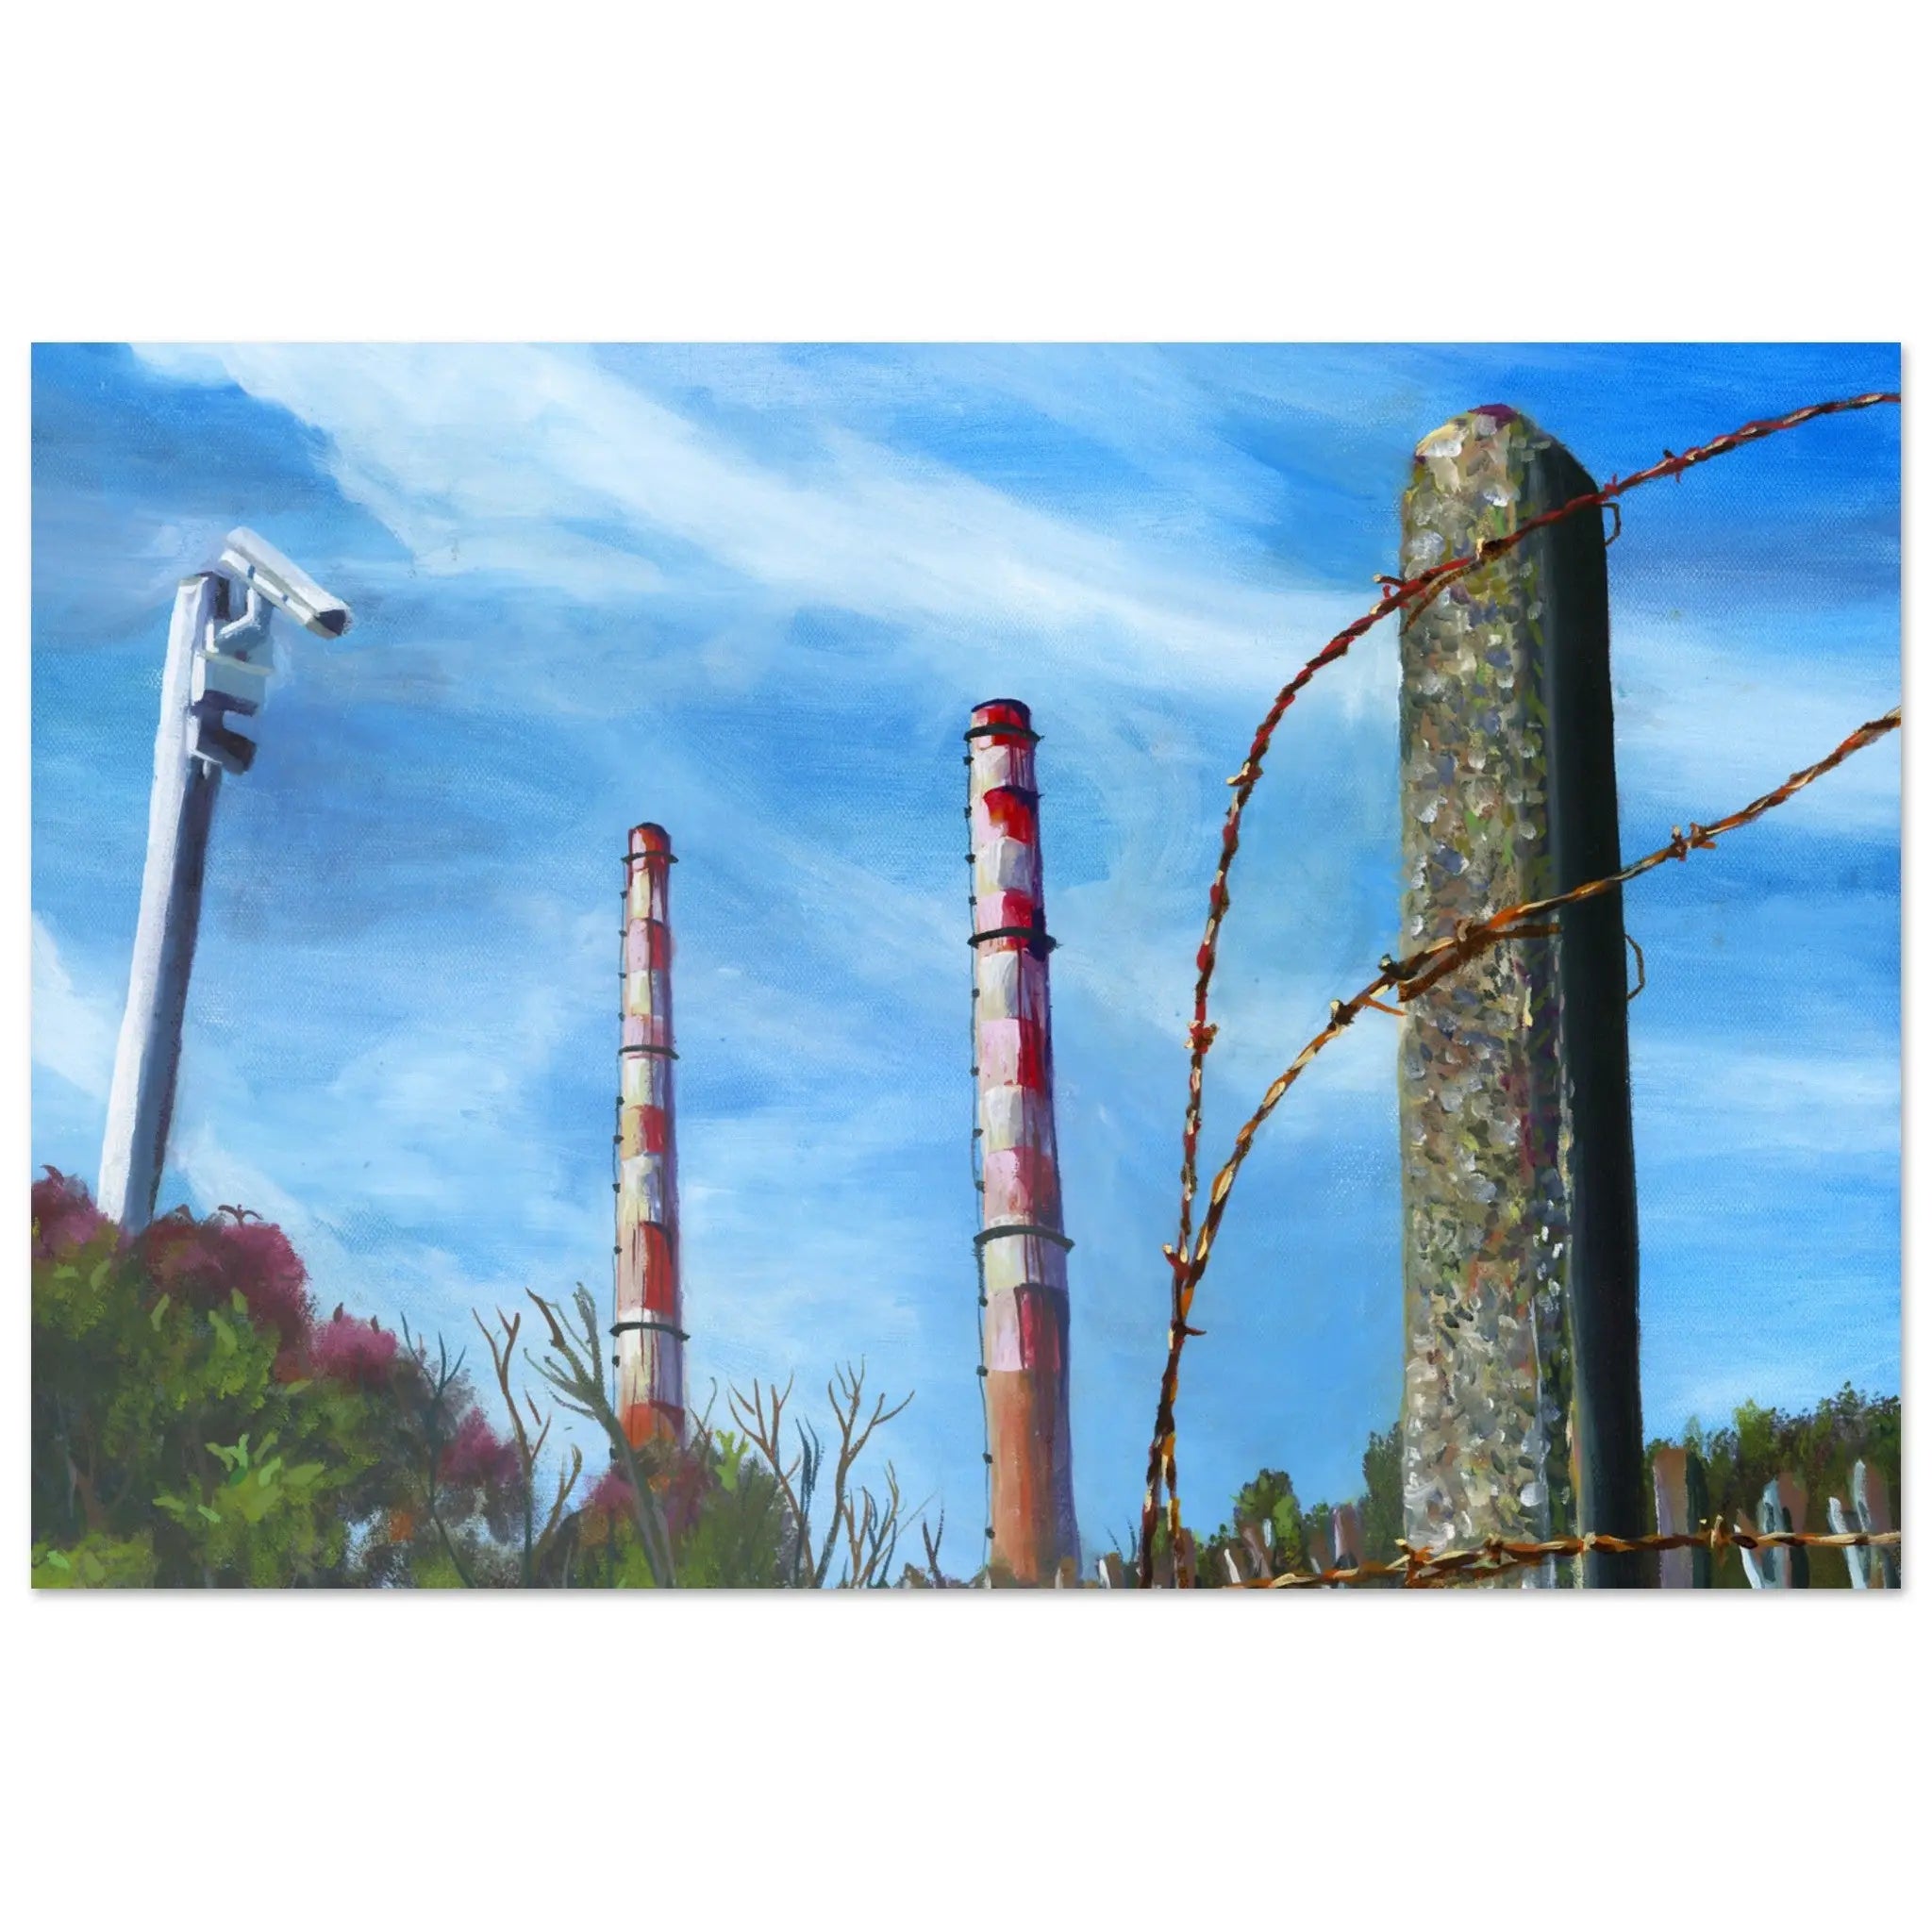 Aluminum print of lighthouse and pole towers